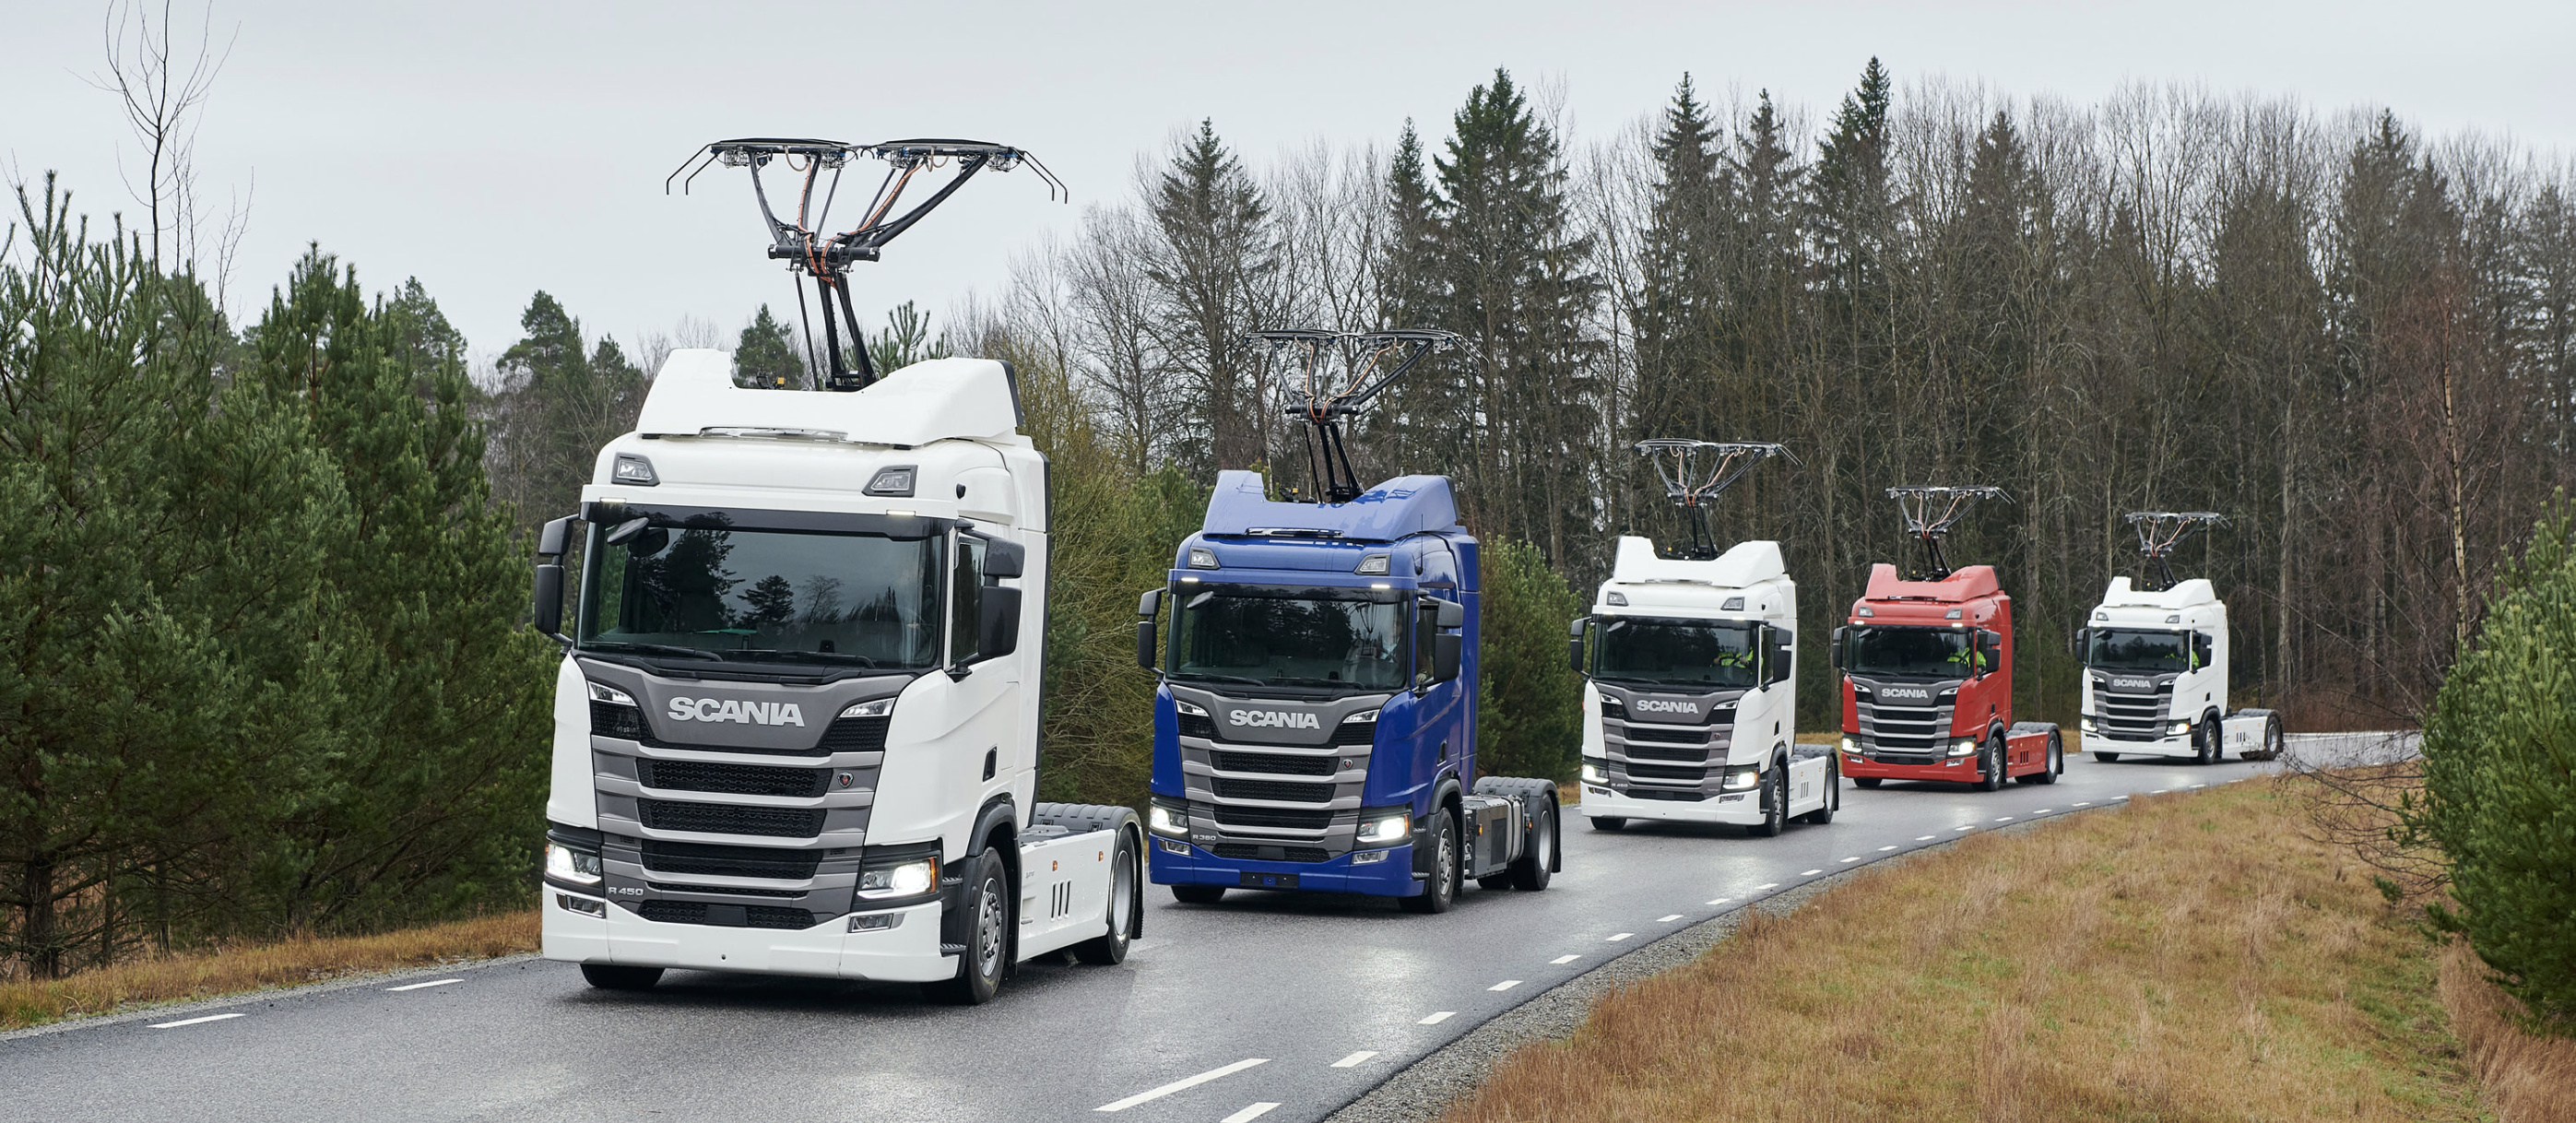 Seven More Scania Trucks to Be Delivered as German E-road Expands 2800x1220